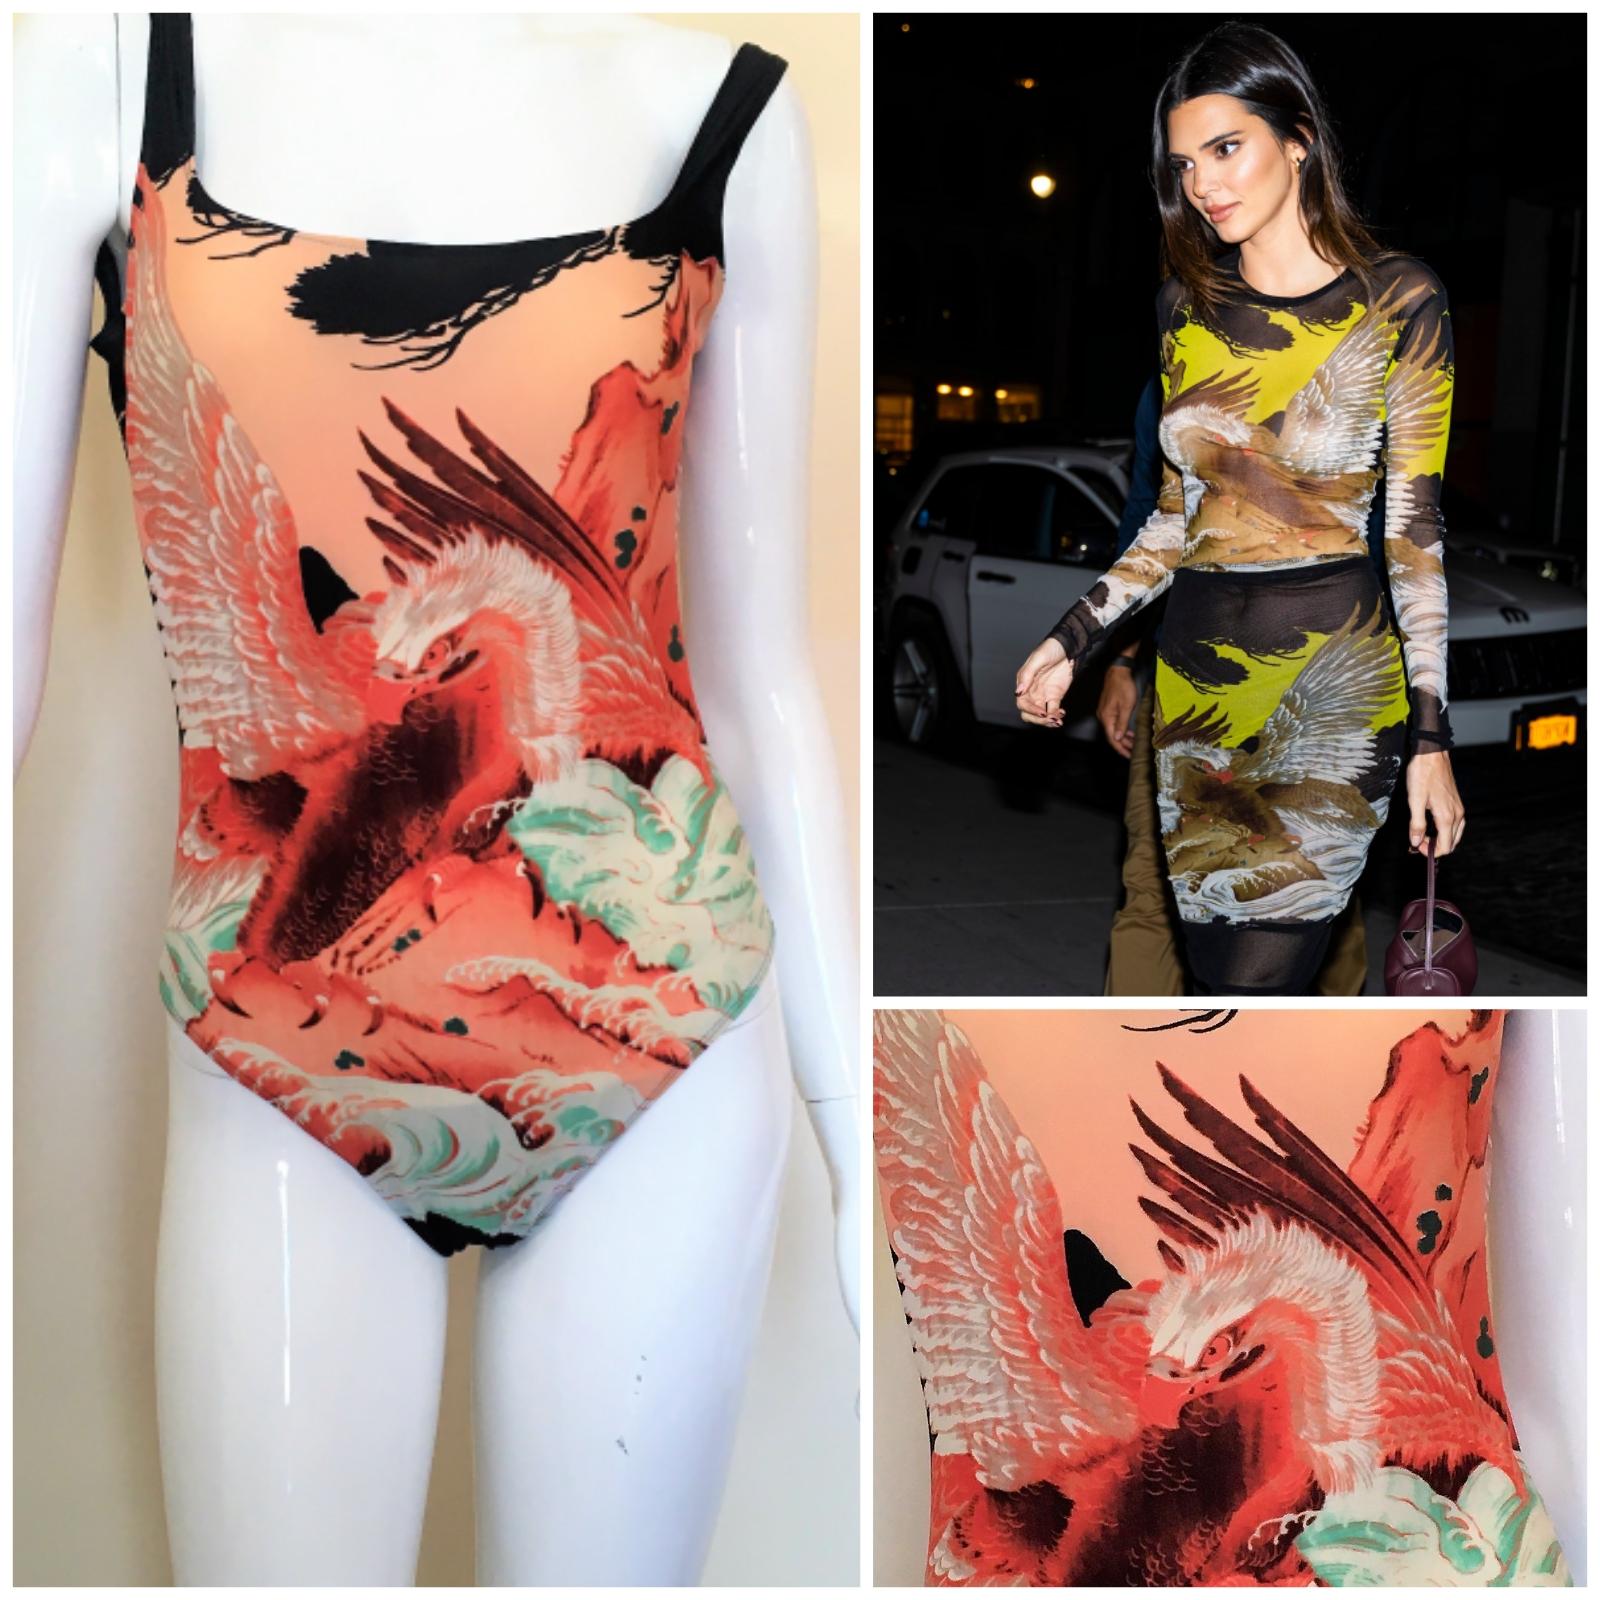 Golden Japanese Eagle one piece swimsuit by JEAN PAUL GAULTIER!
Wonderful piece from the 90s!
Kendall Jenner worn the same pattern in New York, October 2021. 

EXCELLENT condition!

SIZE
It fits from medium to large.
Stretchy fabric.
No size